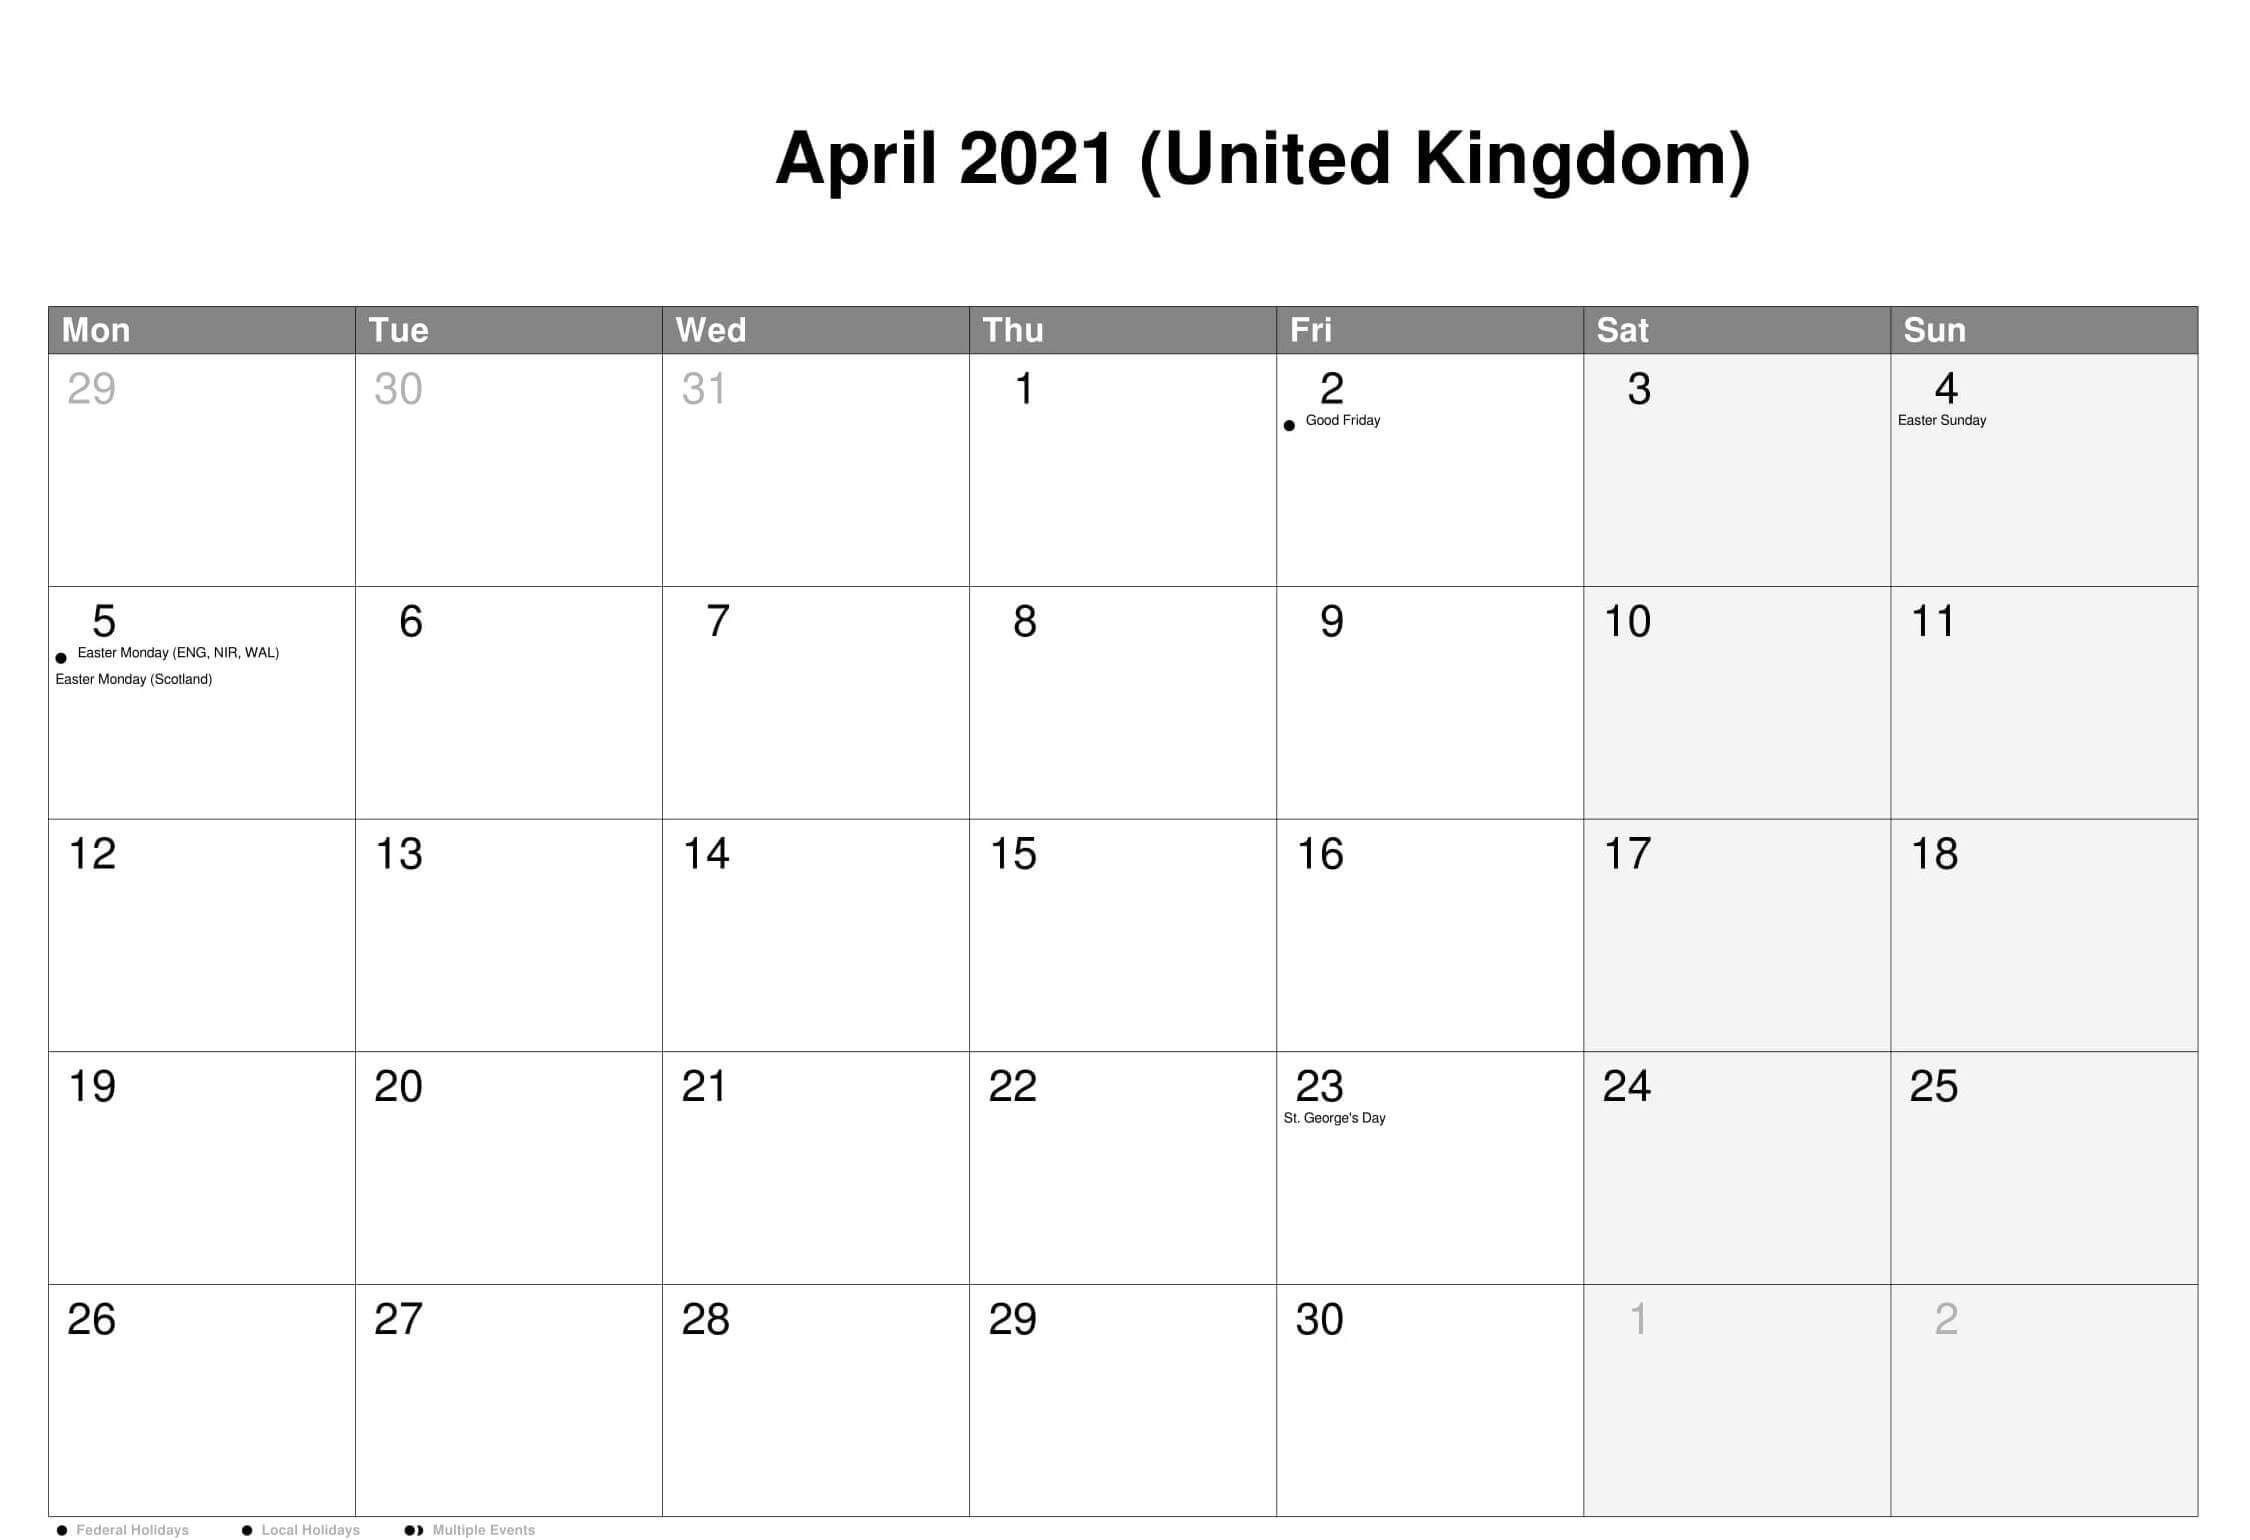 April 2021 Calendar With Holidays Uk In 2021 | 2021-Hebrew And Calendars 2021-2021